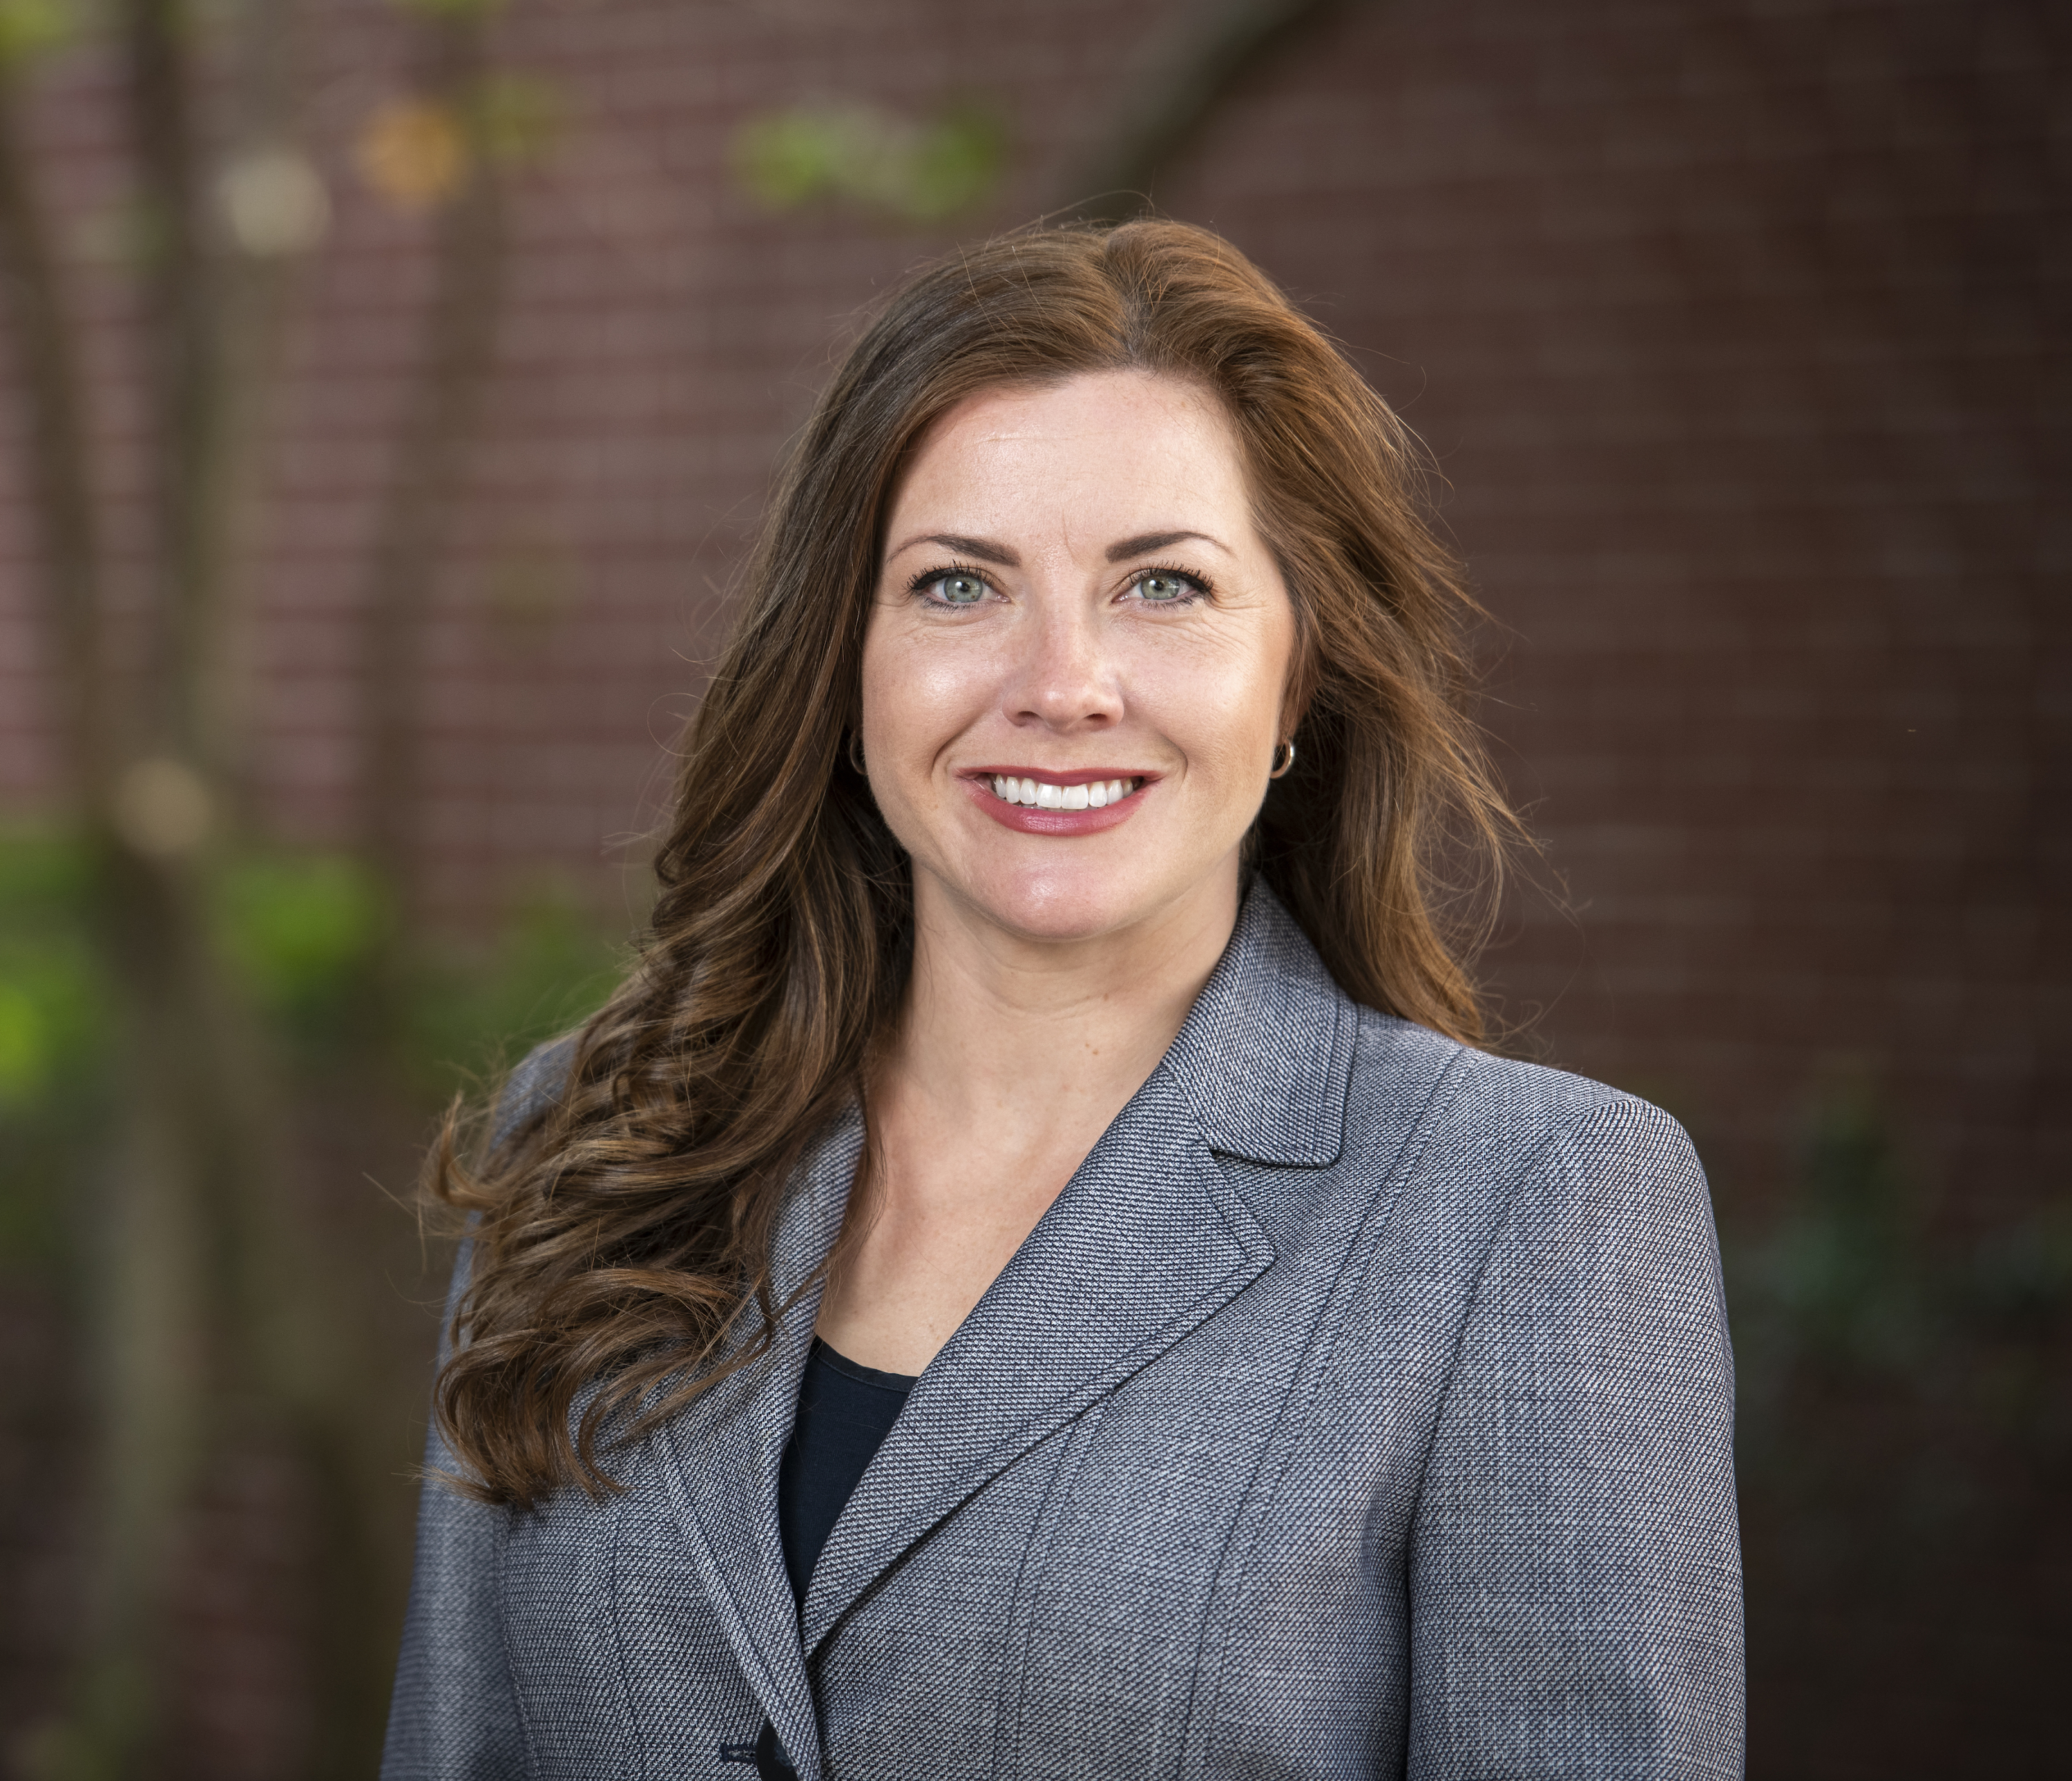 Skye Duckett has been named the new vice president and chief human resources officer after a nationwide search and will join Georgia Tech beginning January 31, 2022.